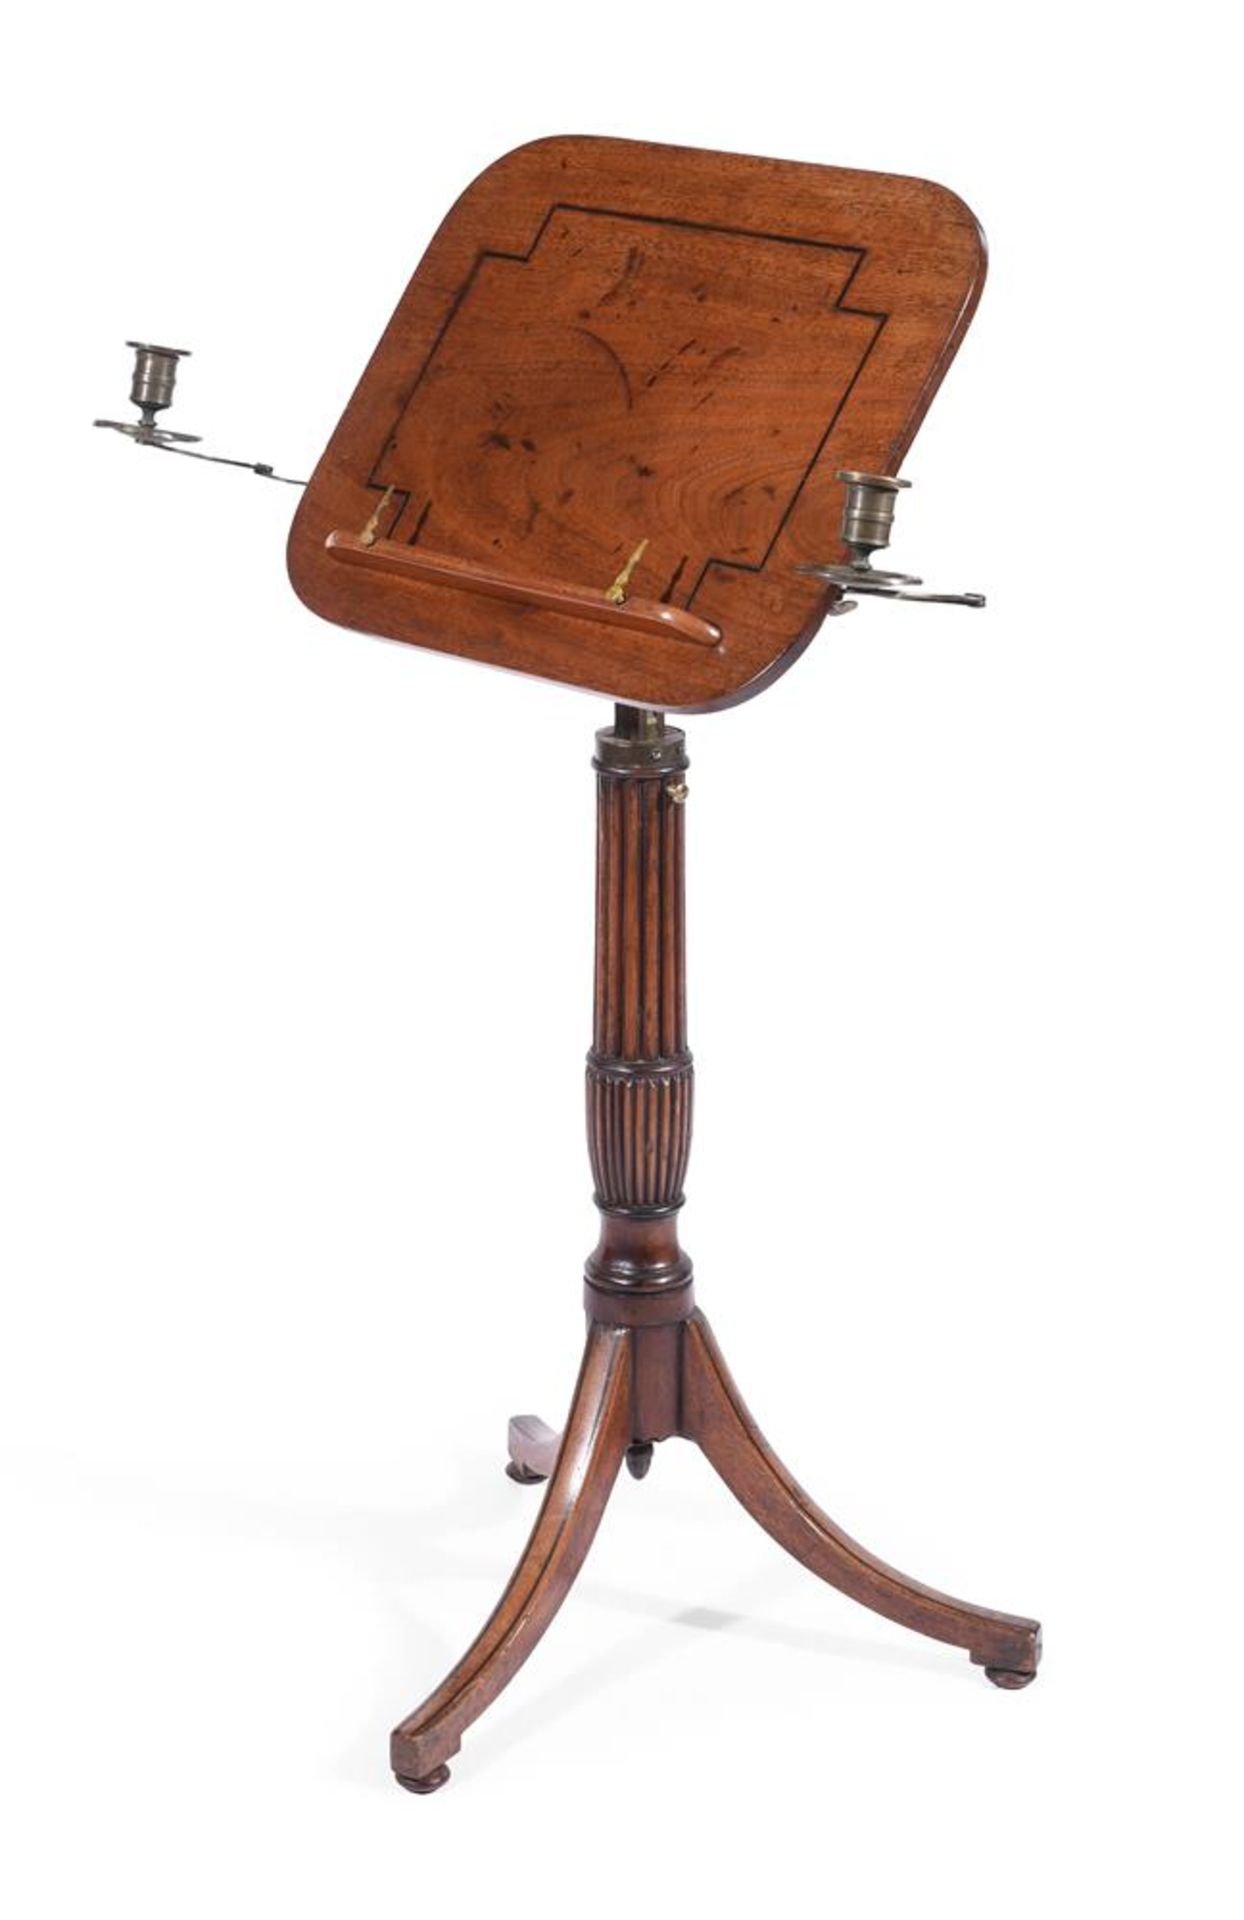 A REGENCY MAHOGANY AND LINE INLAID MUSIC STAND CIRCA 1815